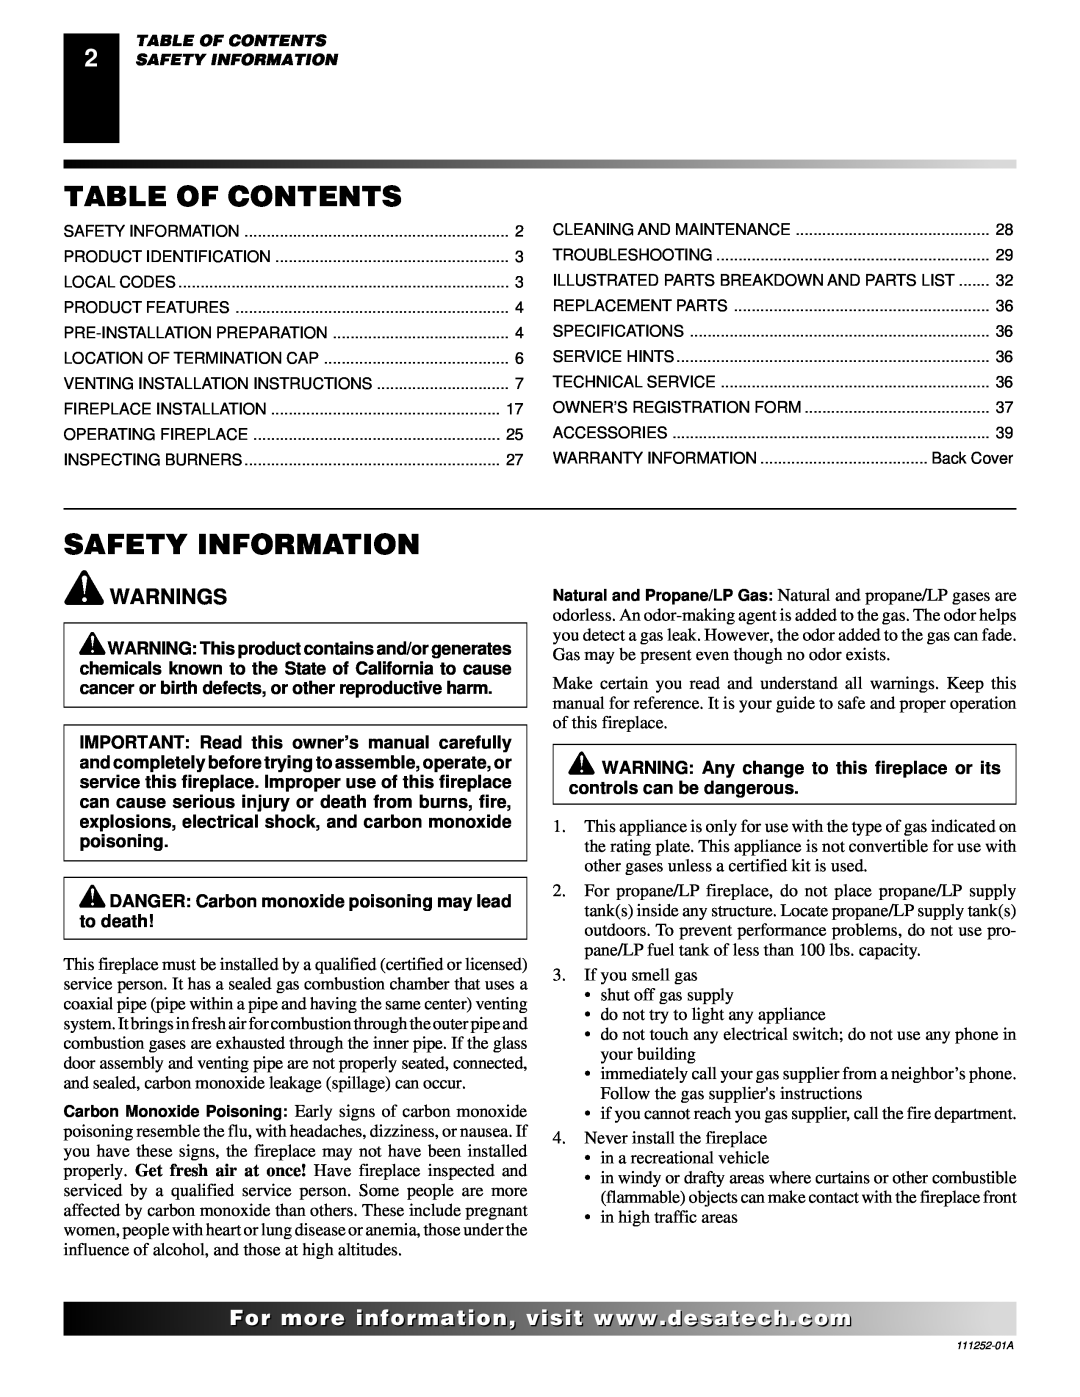 Desa CHDV36NRA installation manual Table Of Contents, Safety Information, Warnings 